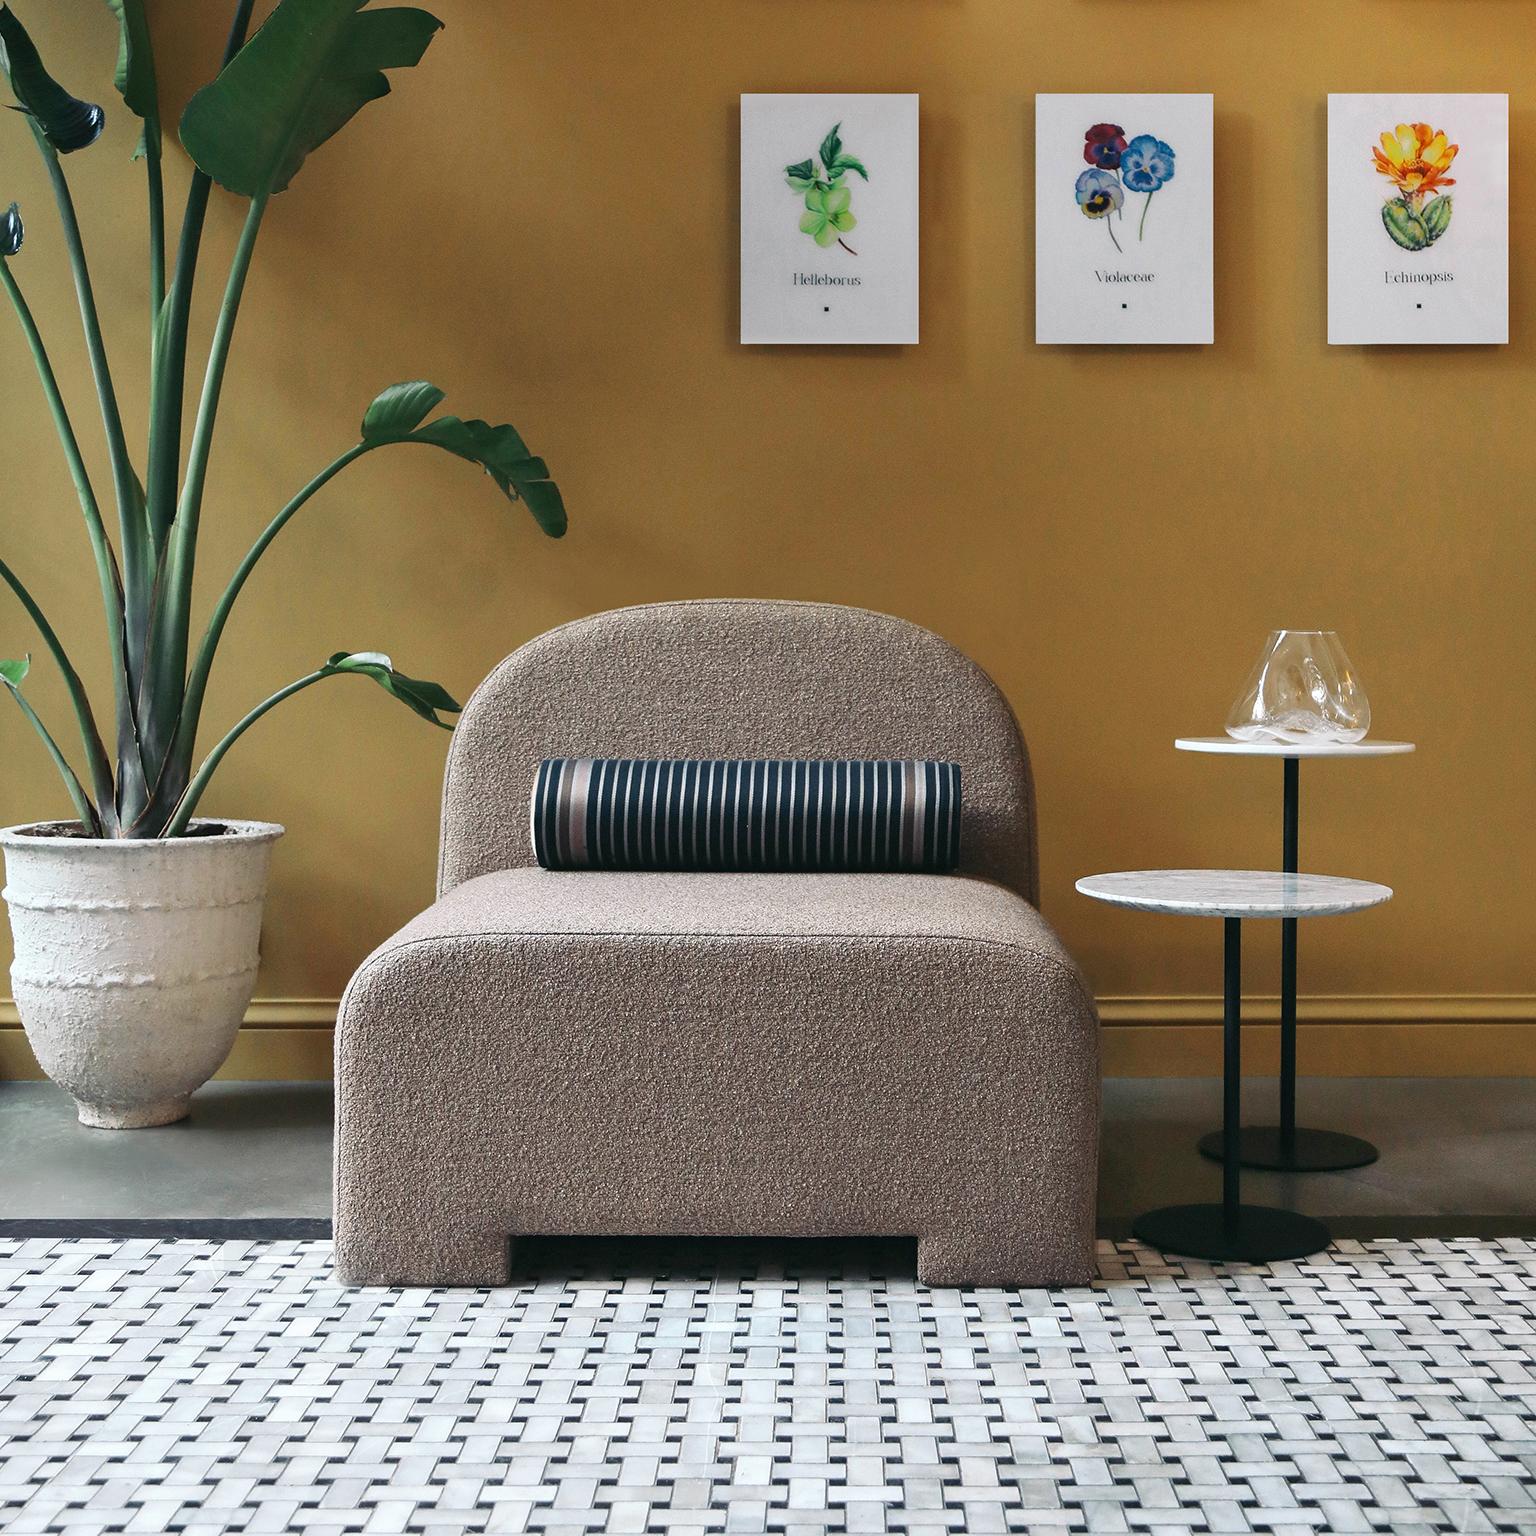 Sosa armless chair by Lagu
Designed by Ufuk Ceylan
Dimensions: W 90 x D 85 x H 80 cm
Materials: Bouclé, Fabric, Foam, Hardwood.

Standing out with its round details and upholstery covering its entire surface, Sosa Sofa is coming to your living